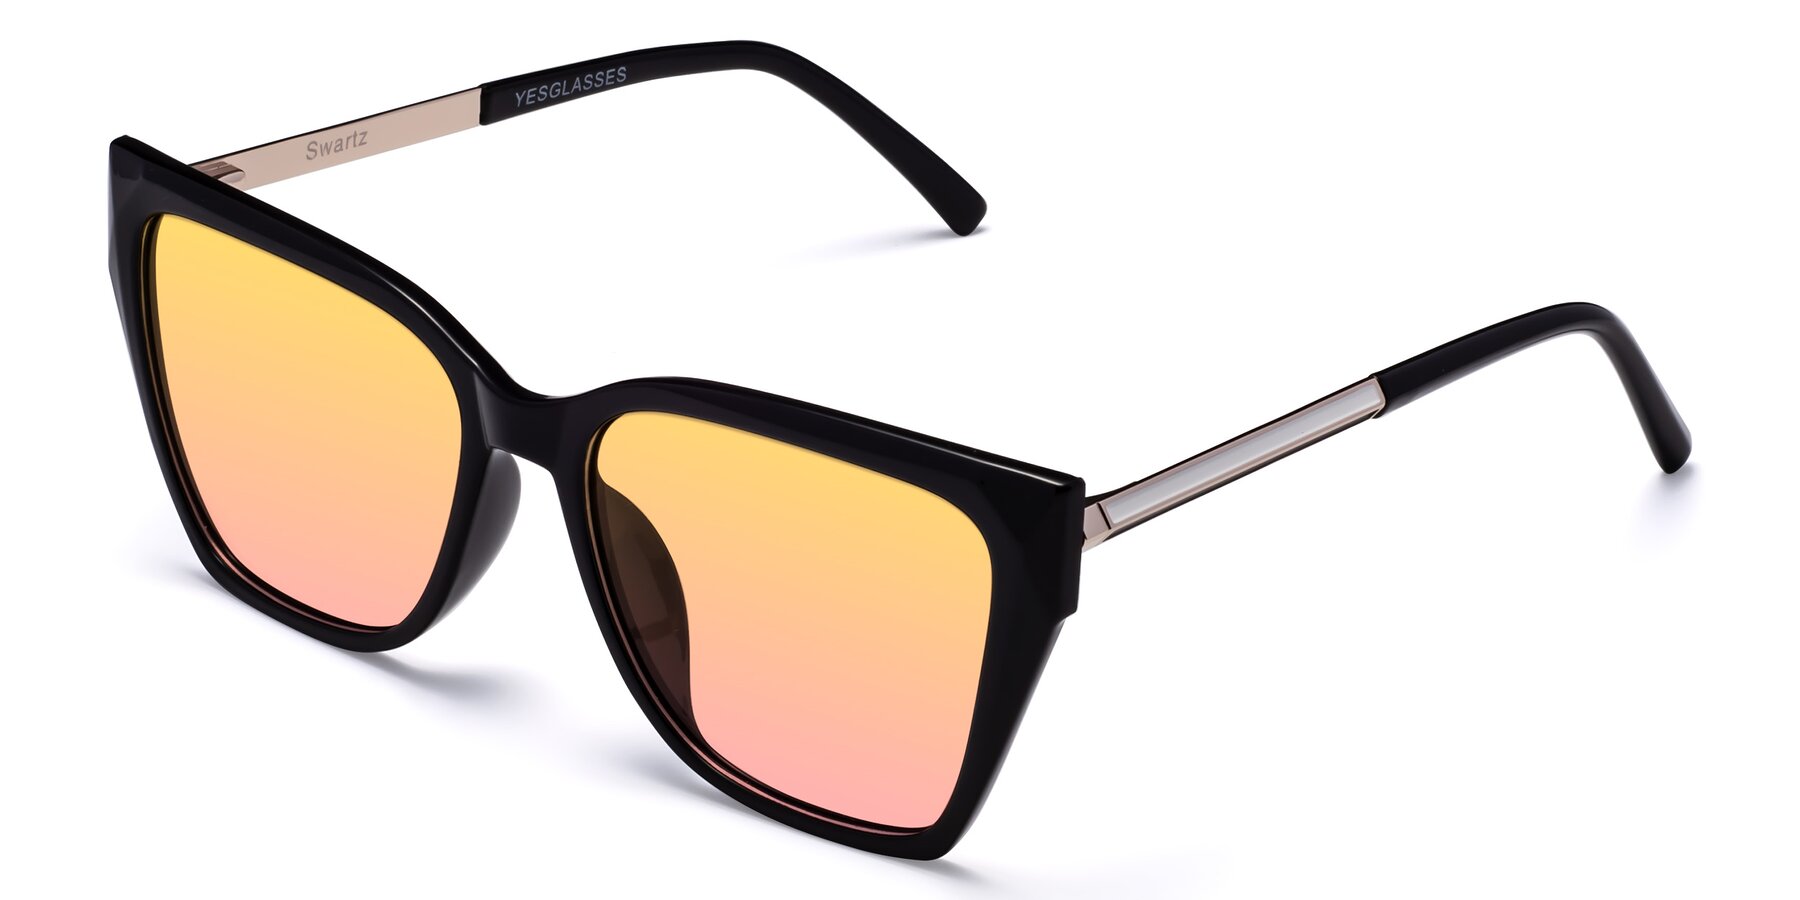 Angle of Swartz in Black with Yellow / Pink Gradient Lenses